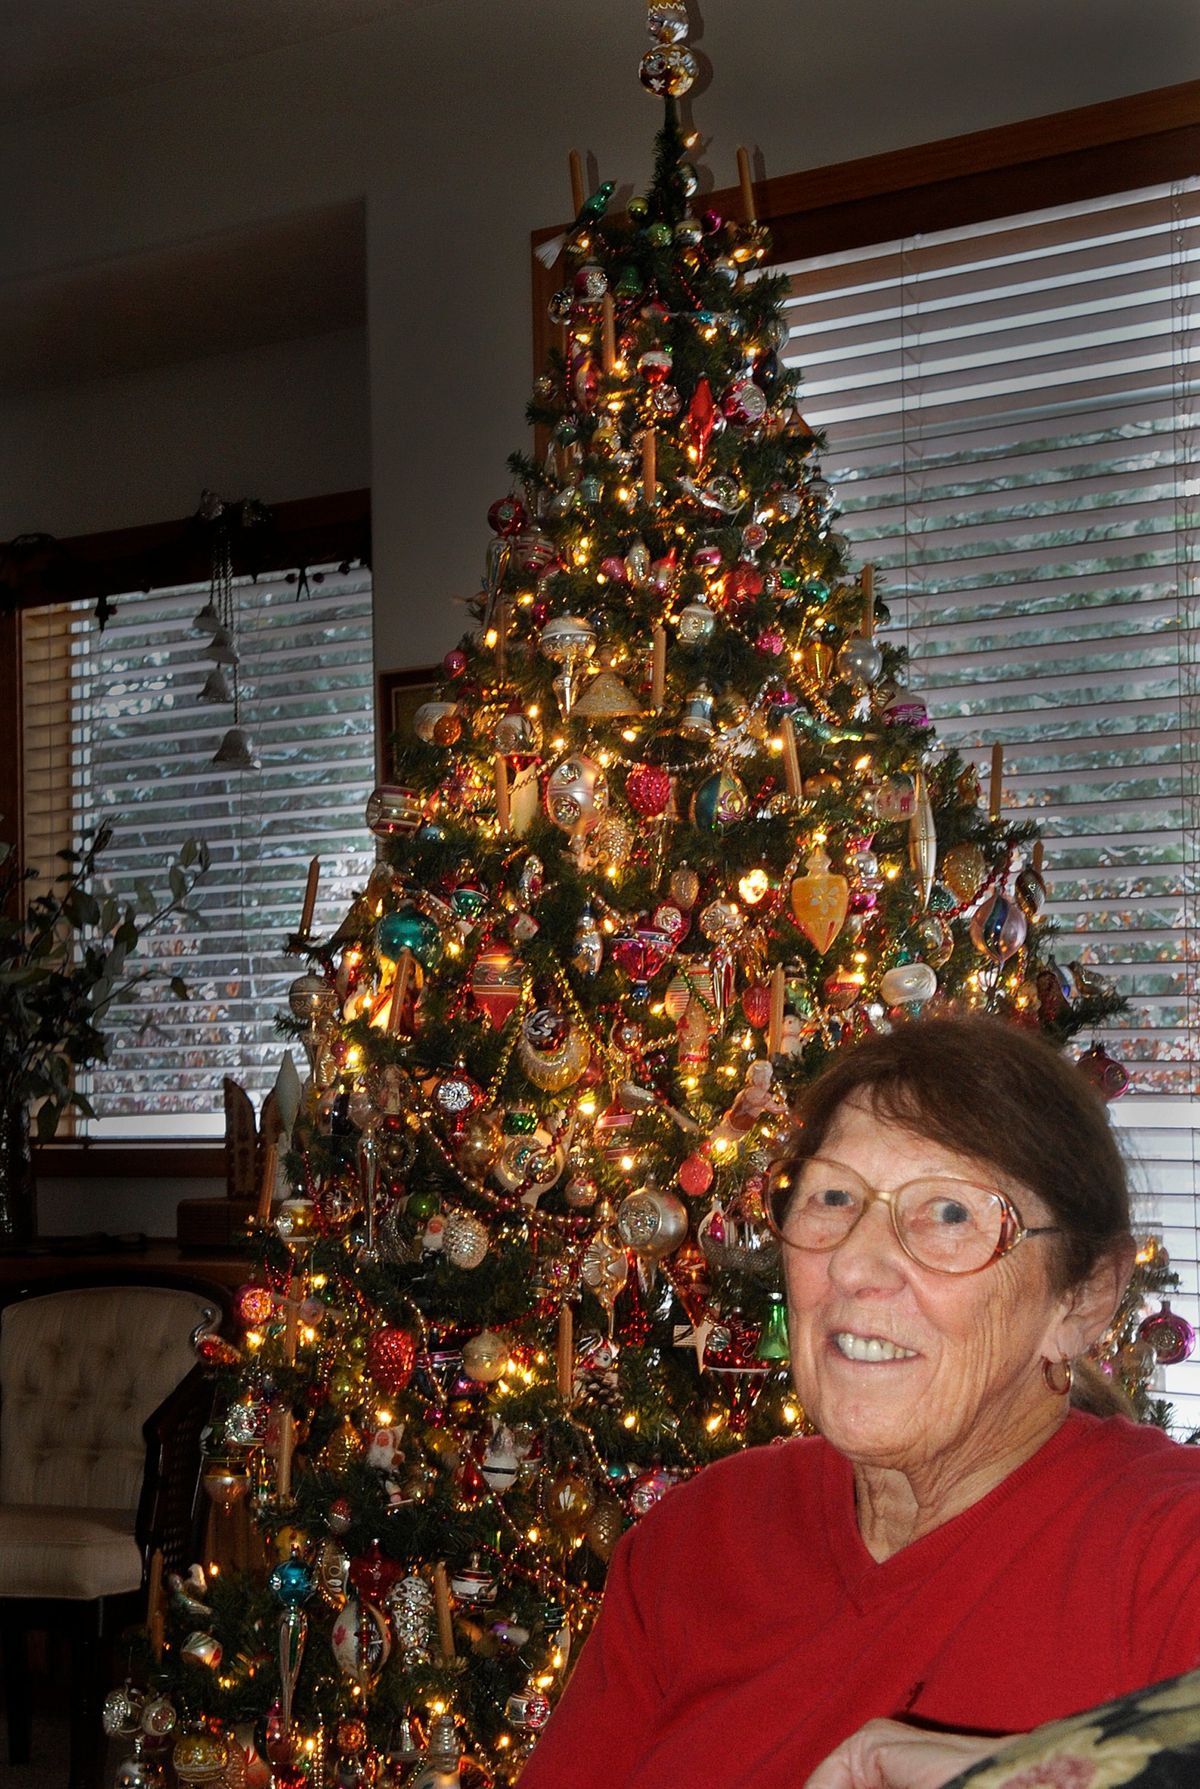 Handmade ornaments fill Christmas trees with beauty and memories | The  Spokesman-Review